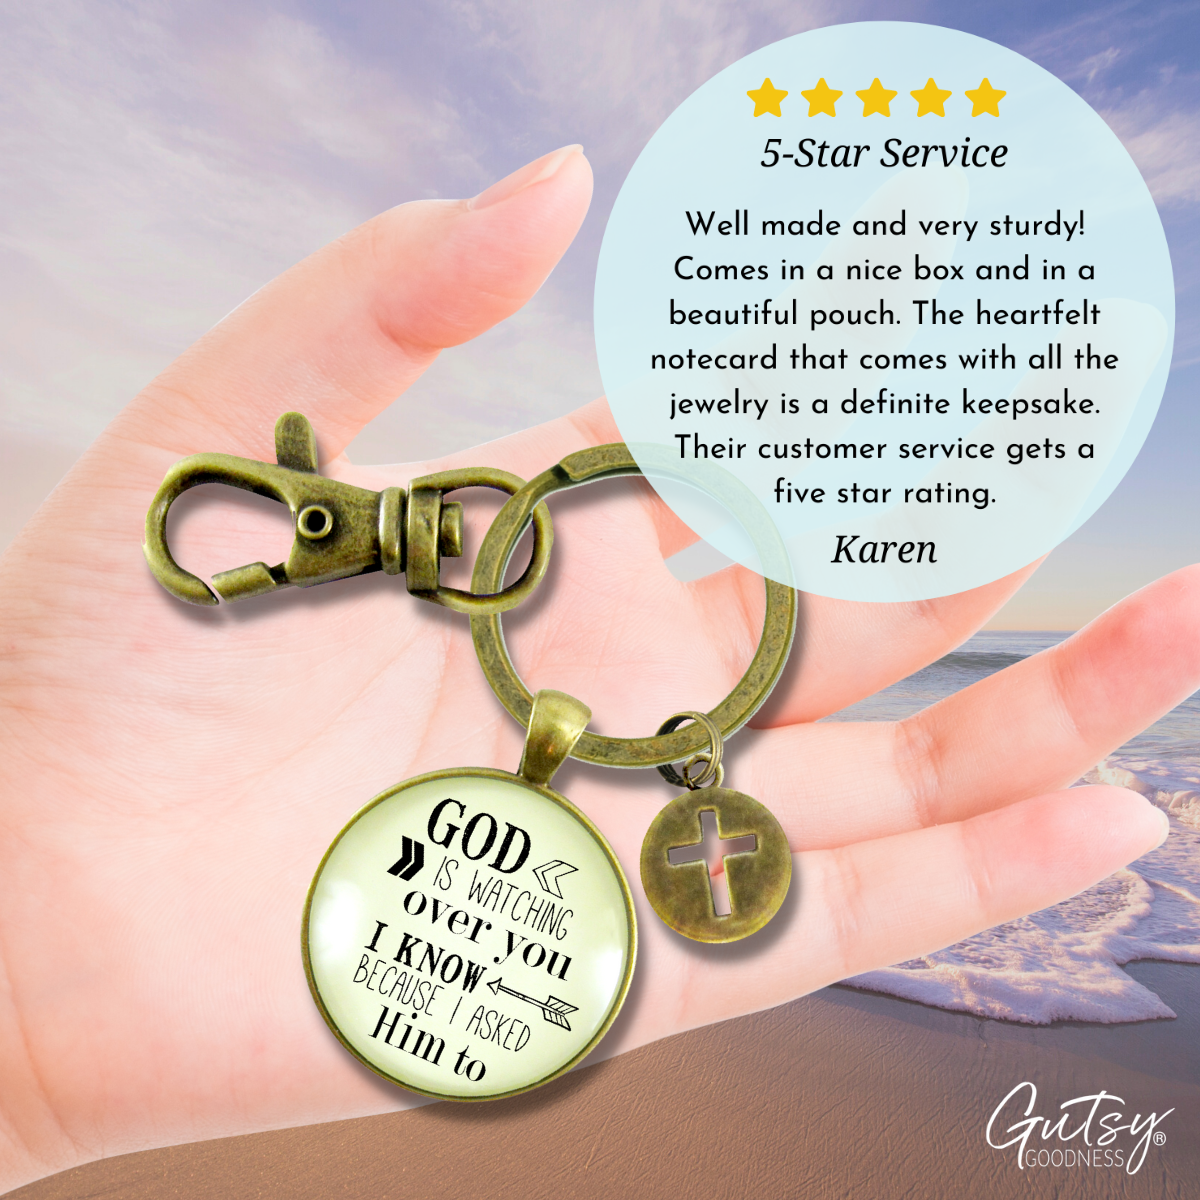 Faith Key Chain He Is Watching Over You Men Women Vintage Bronze Key Ring - Gutsy Goodness Handmade Jewelry;Faith Key Chain He Is Watching Over You Men Women Vintage Bronze Key Ring - Gutsy Goodness Handmade Jewelry Gifts